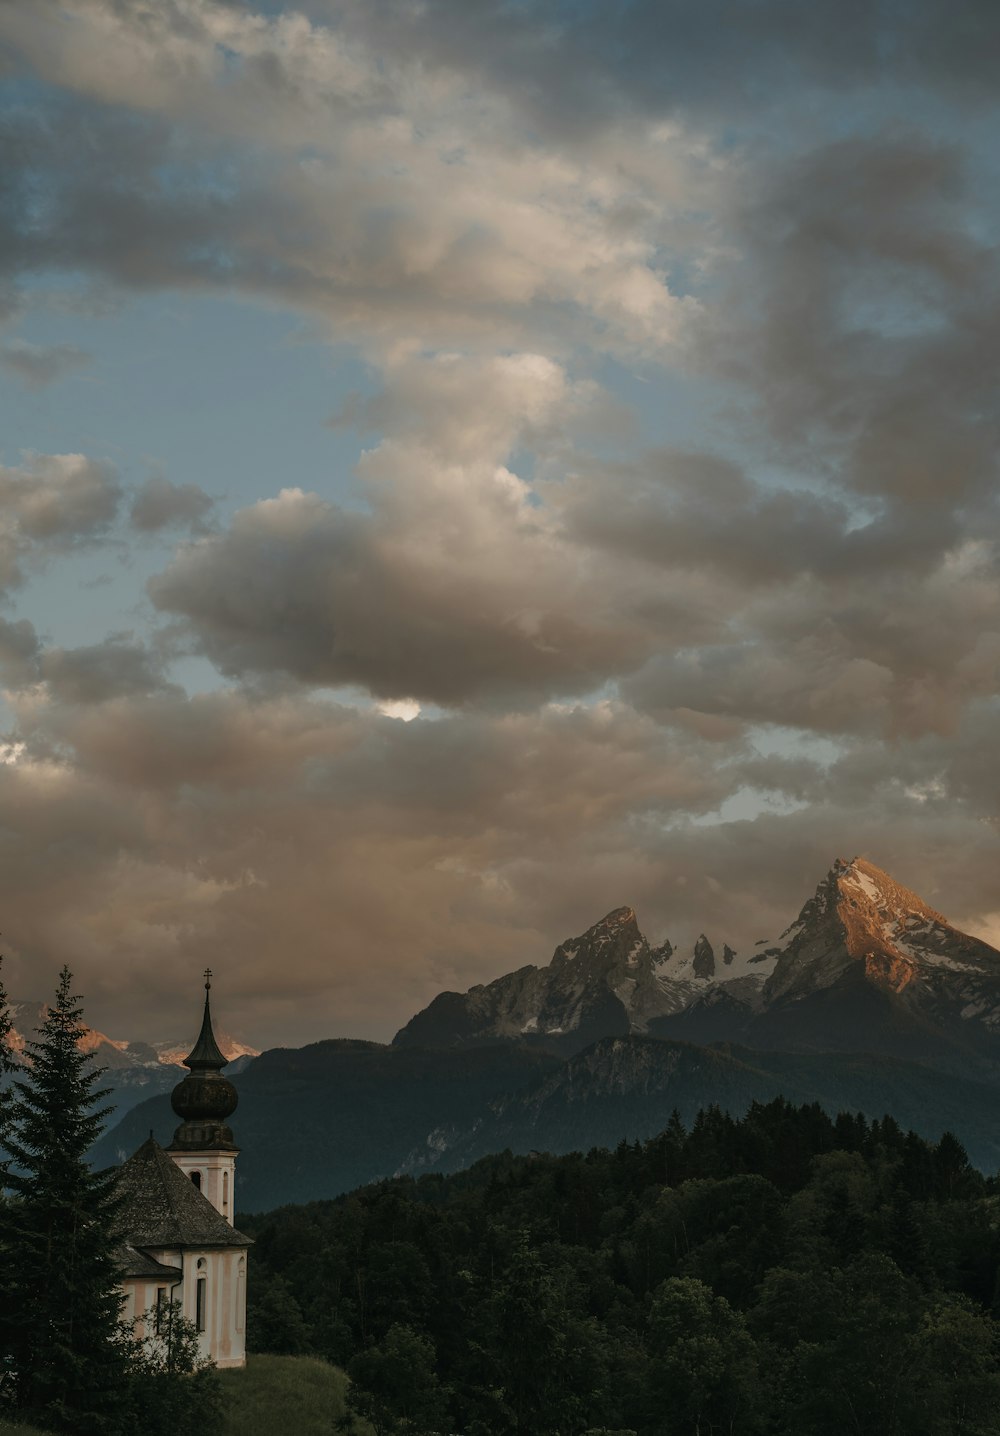 a church in the foreground with a mountain in the background